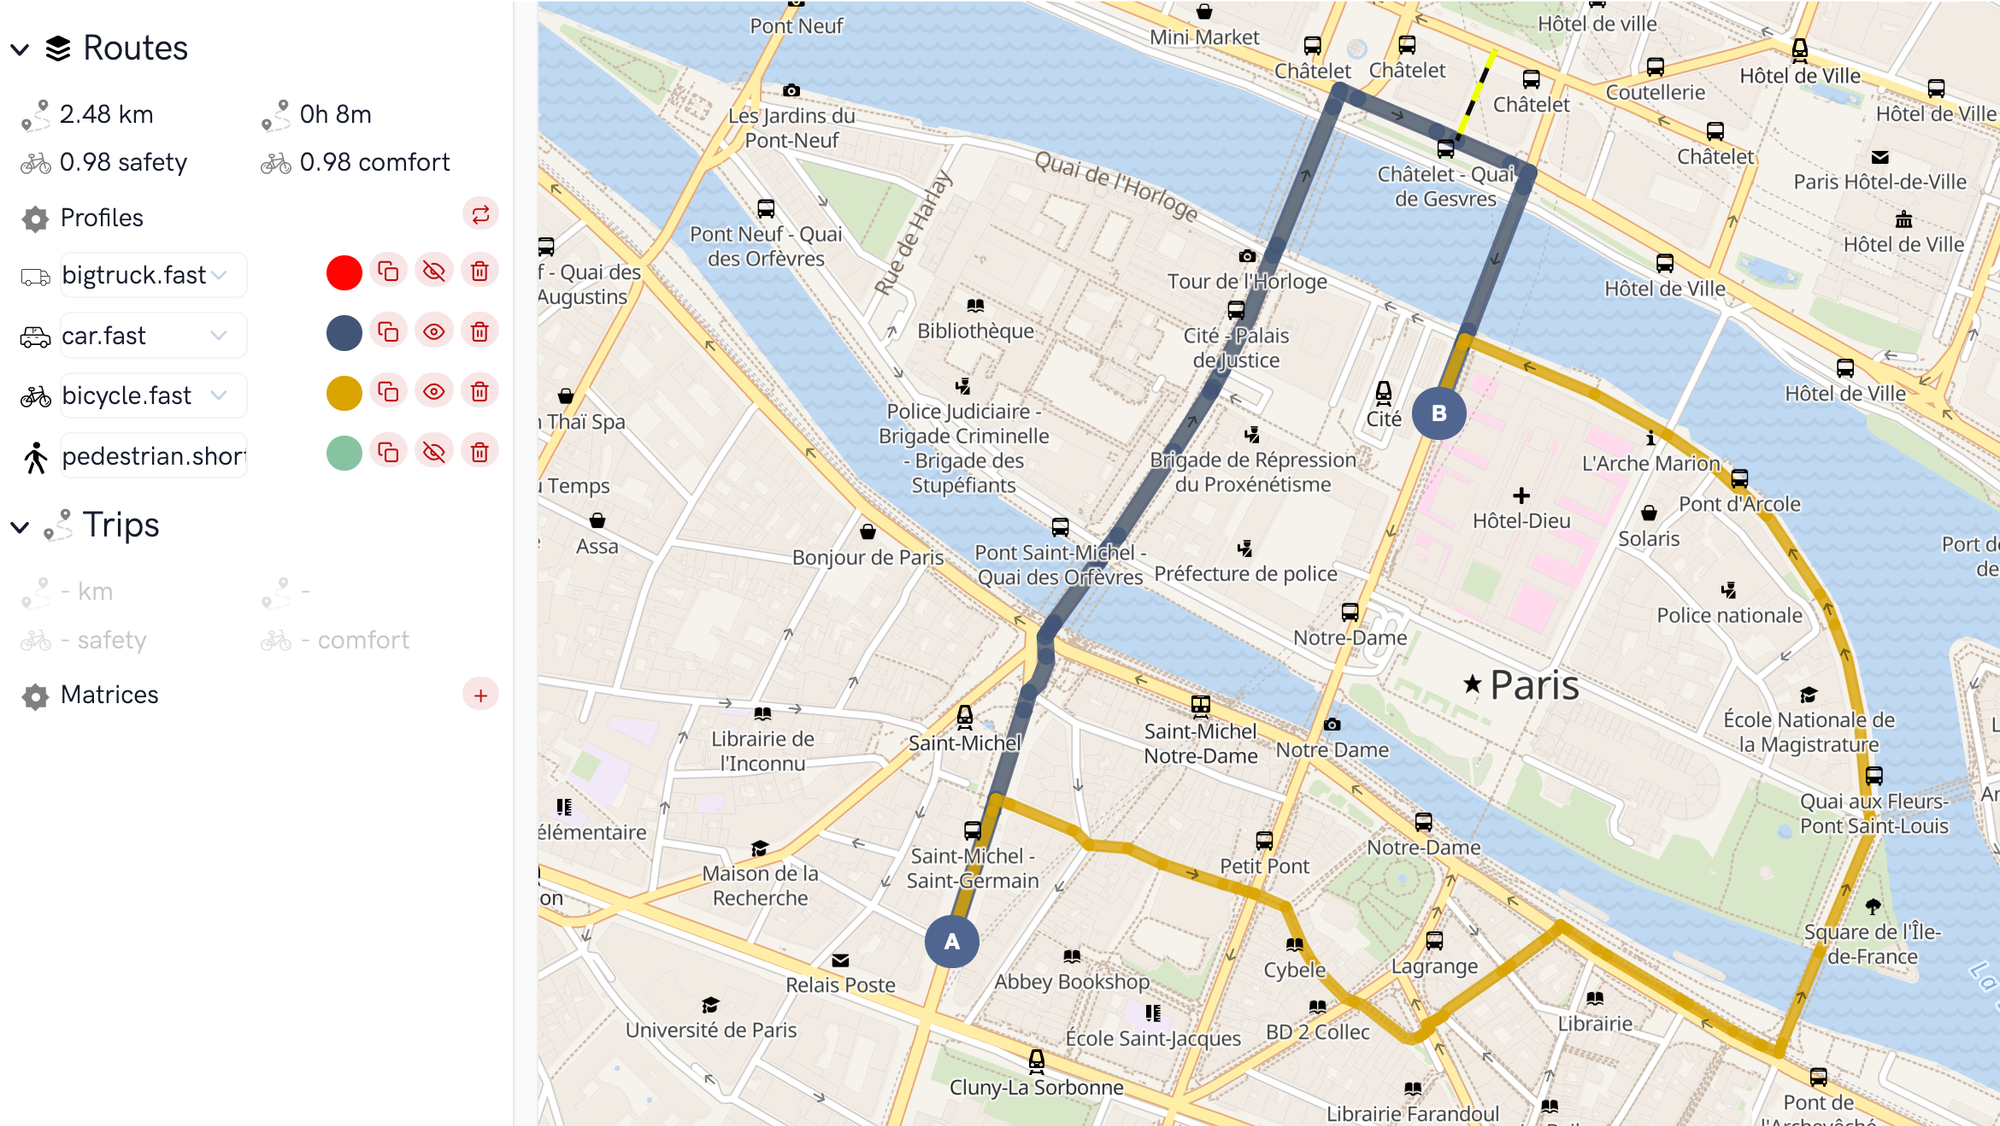 A route planned for bicycle.fast and car.fast in test view in the center for Paris.